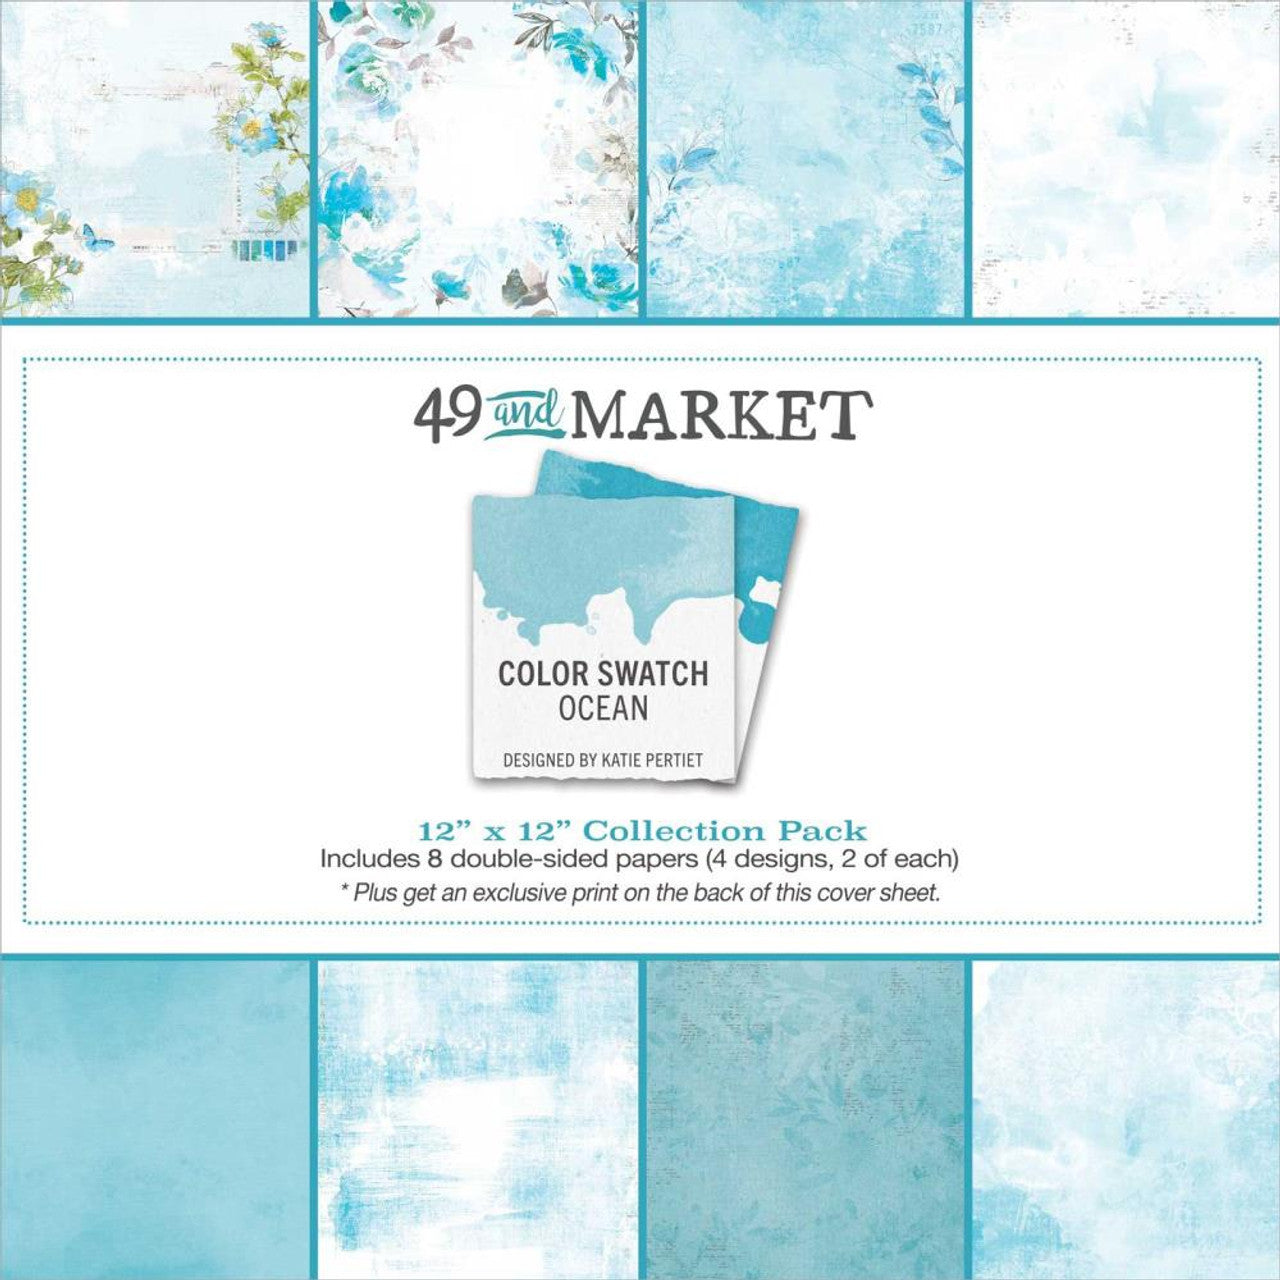 49 and Market Ocean 12x12 Collection Pack